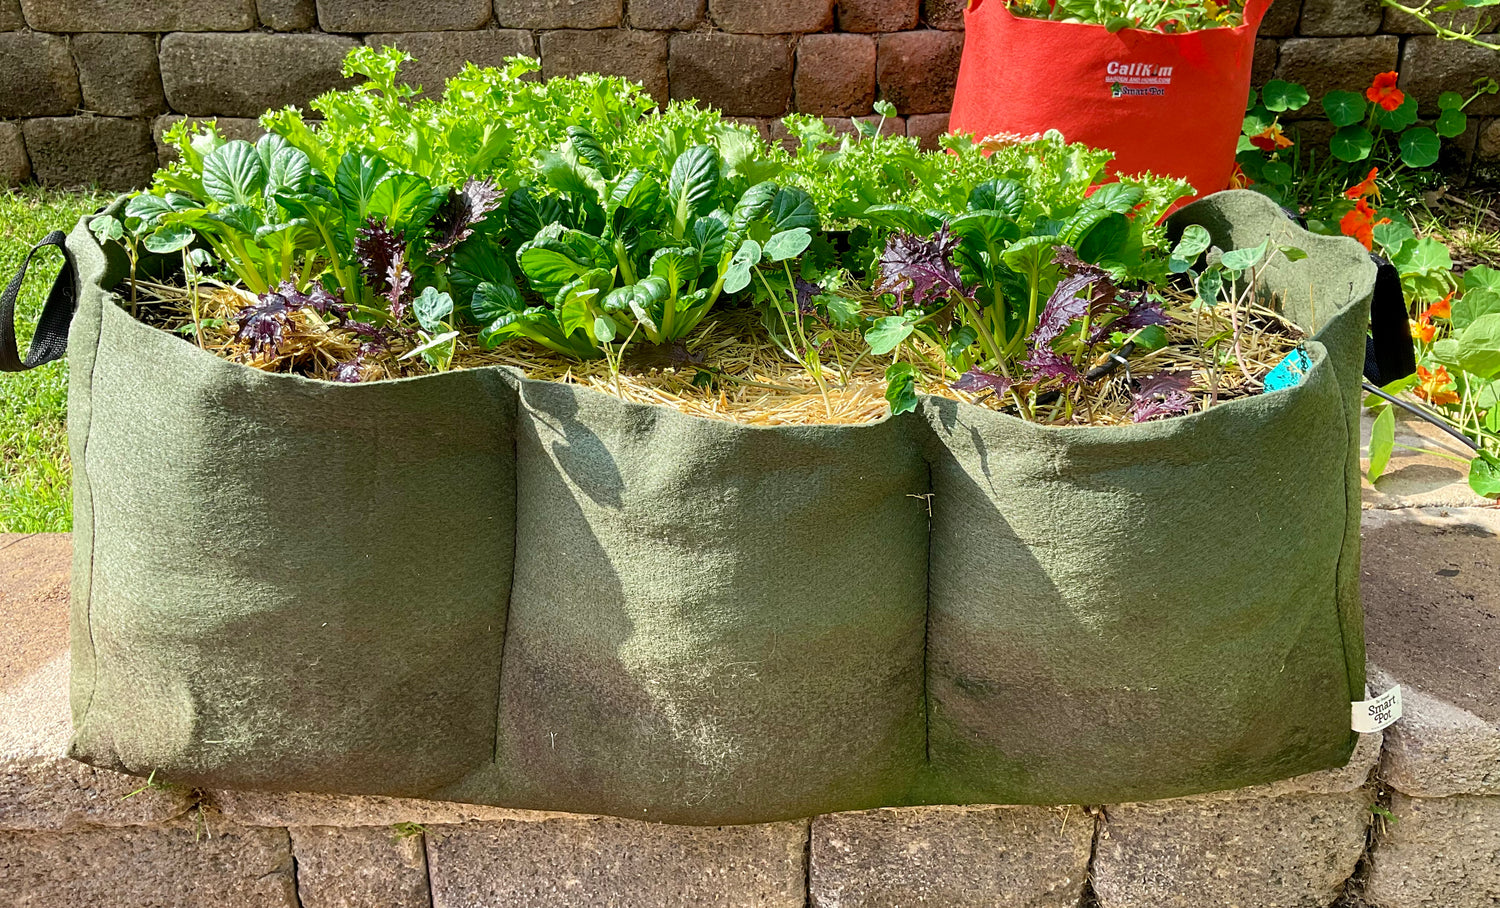 Fabric Raised Beds: The Perks of Growing Vegetables in Fabric Pots